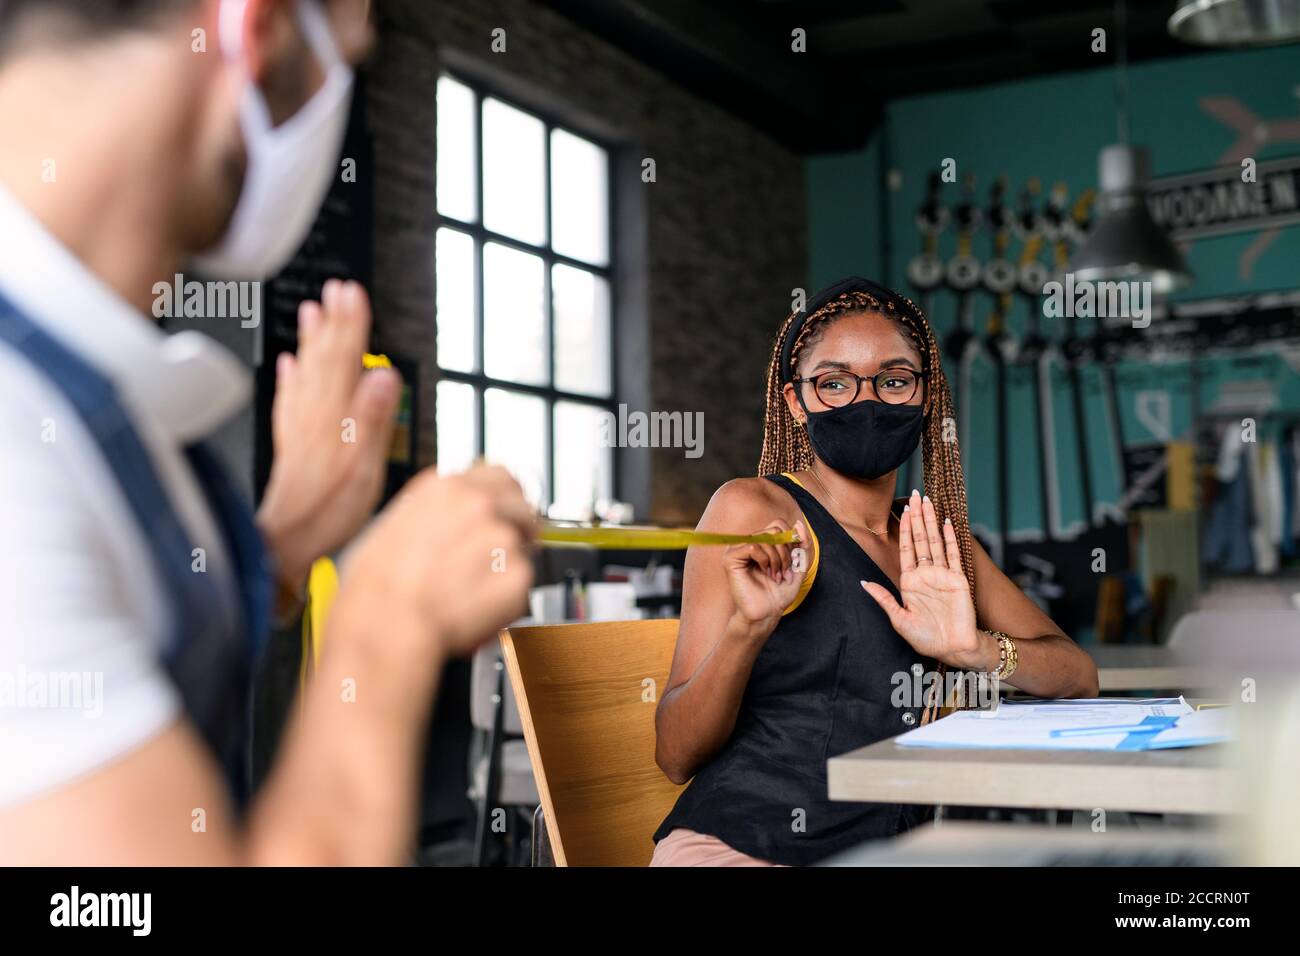 Young businesspeople with face masks working indoors in office, keeping safe distance. Stock Photo